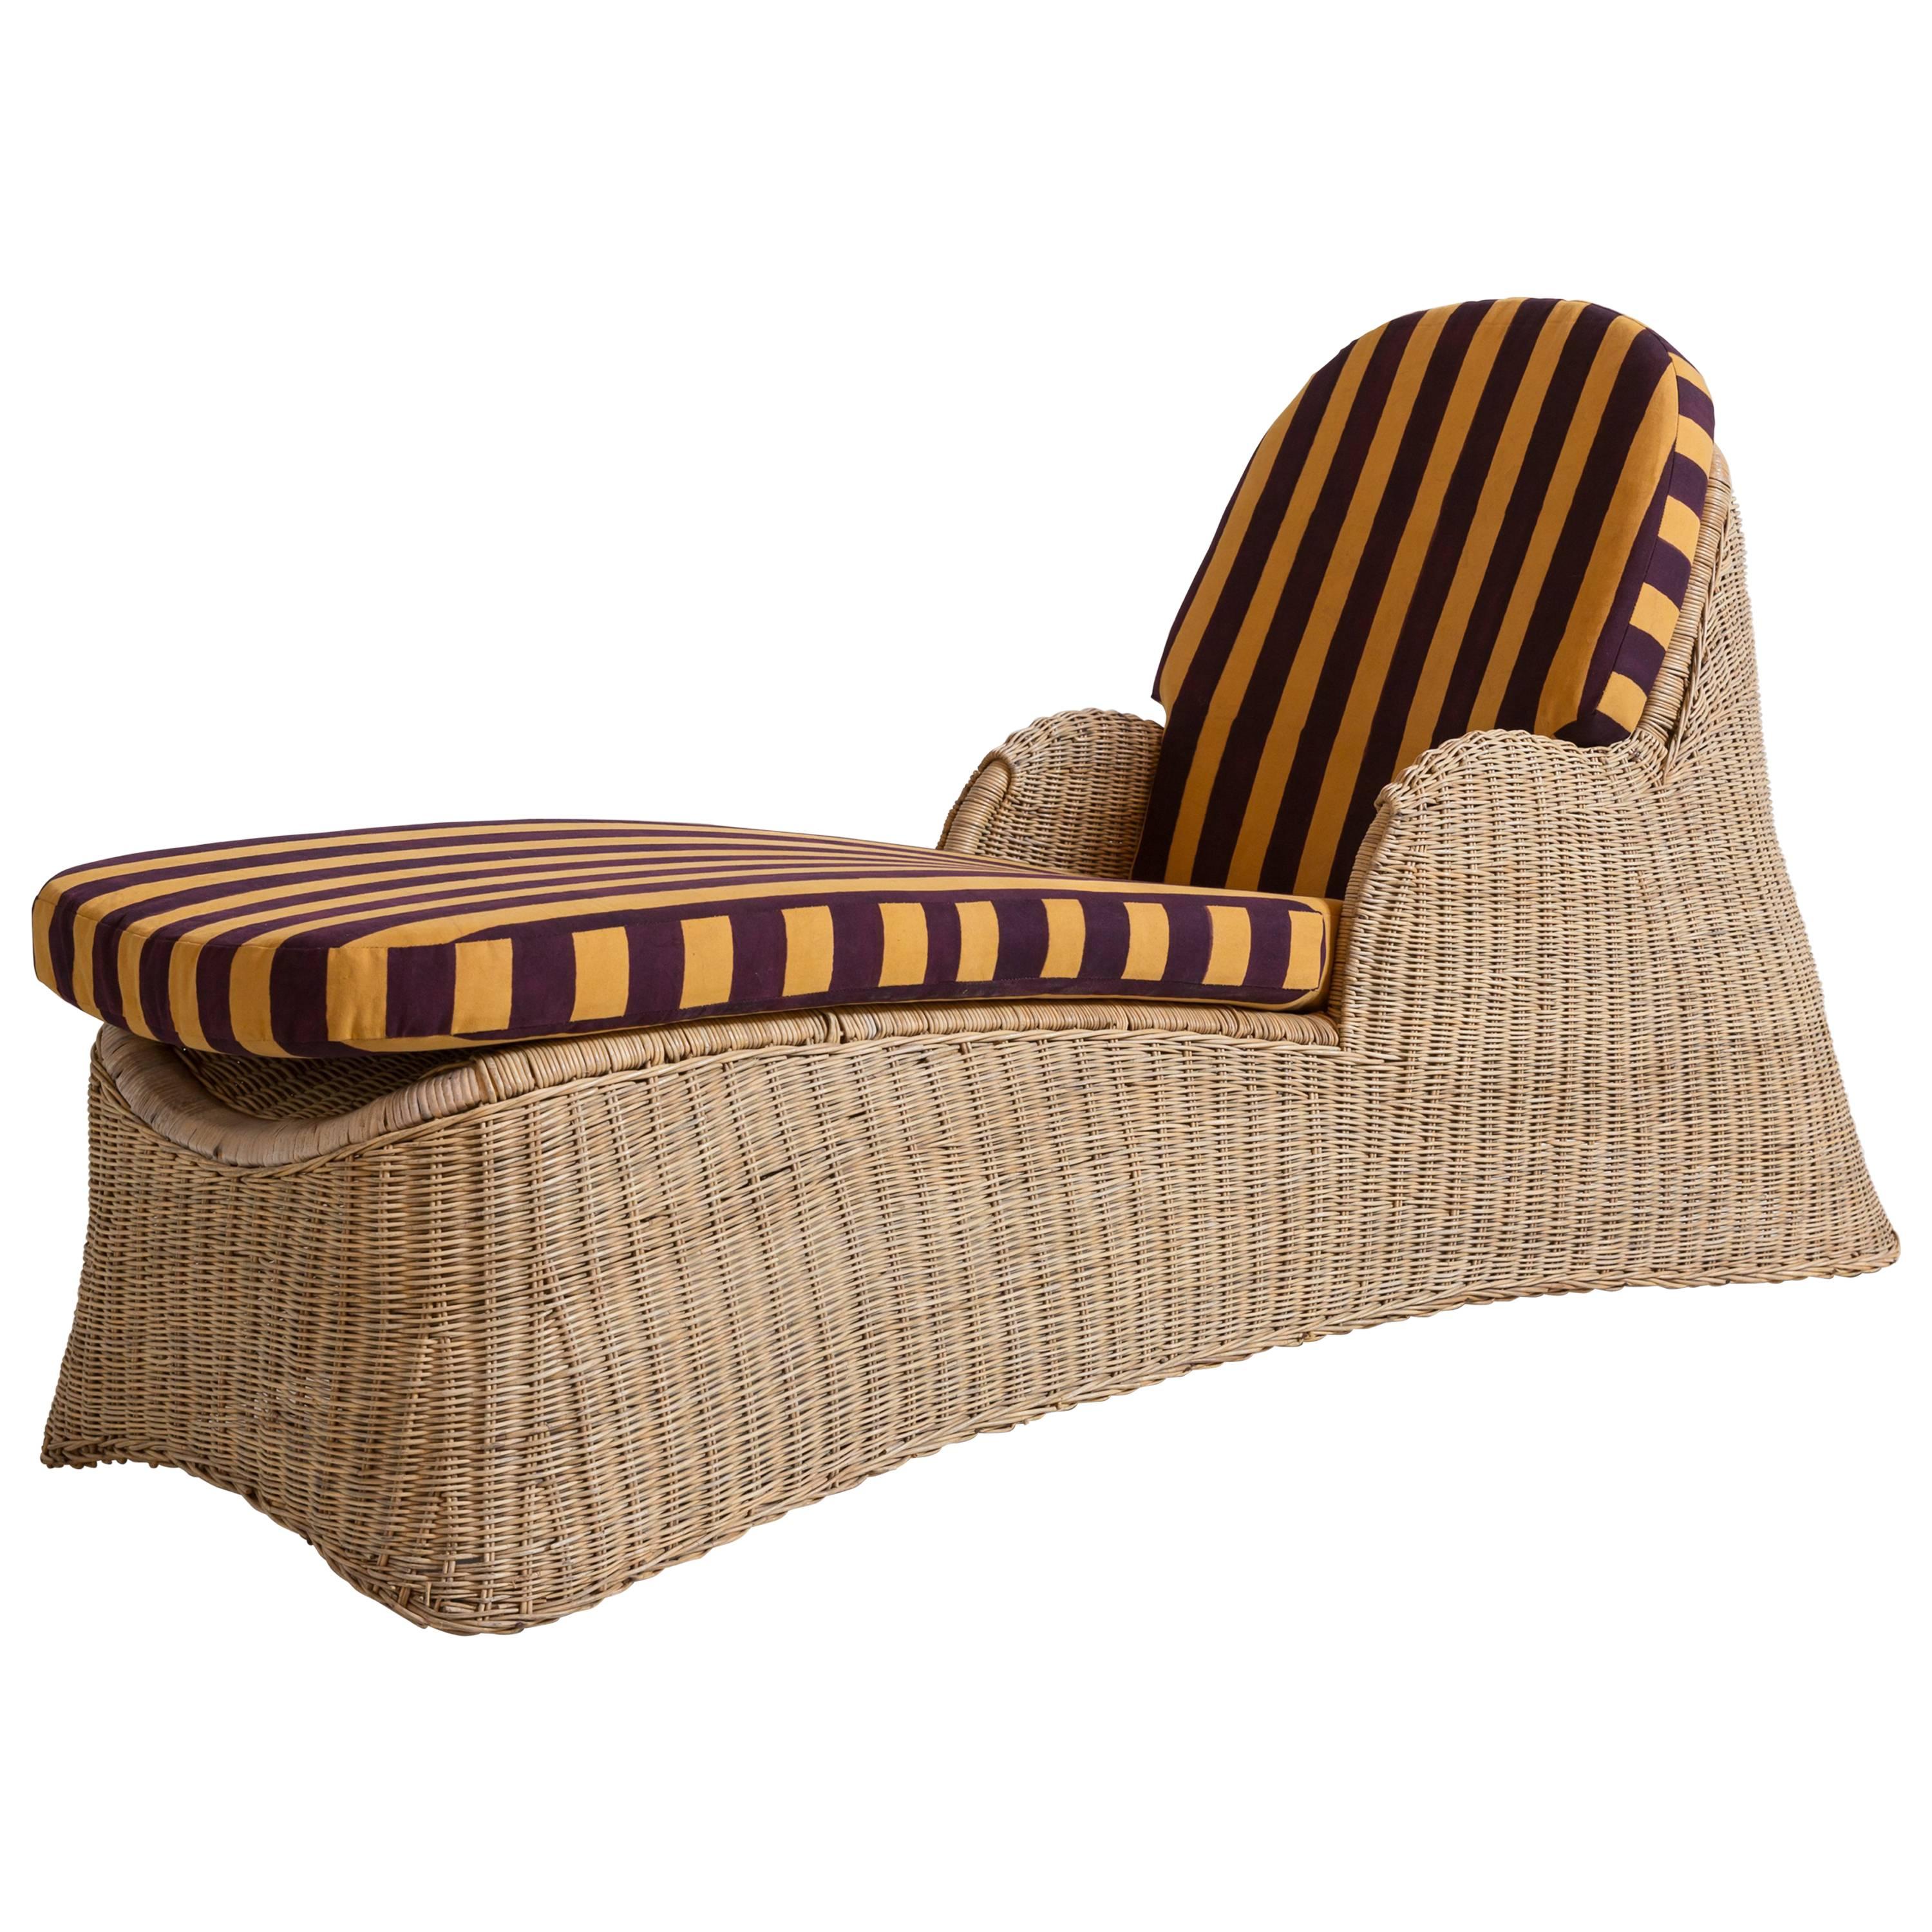 Wicker Chaise Newly Upholstered in Lisa Corti Purple and Yellow Striped Fabric